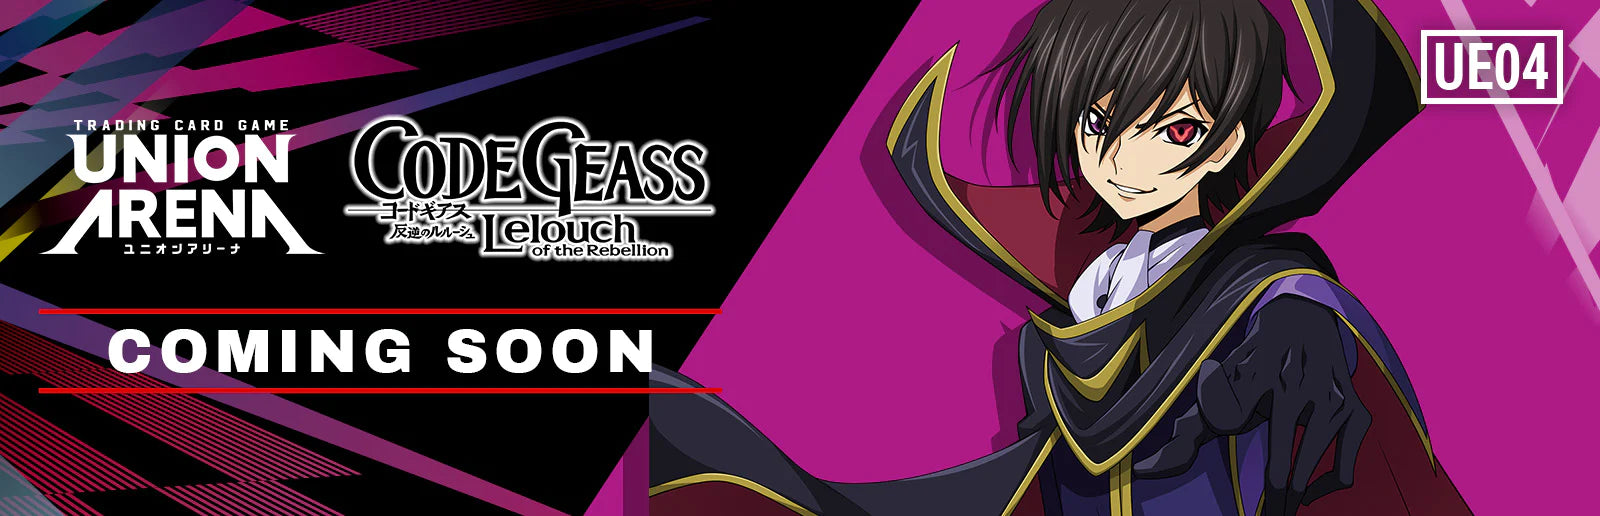 Union Arena - Code Geass: Lelouch of the Rebellion Booster Box (Pre-Order)